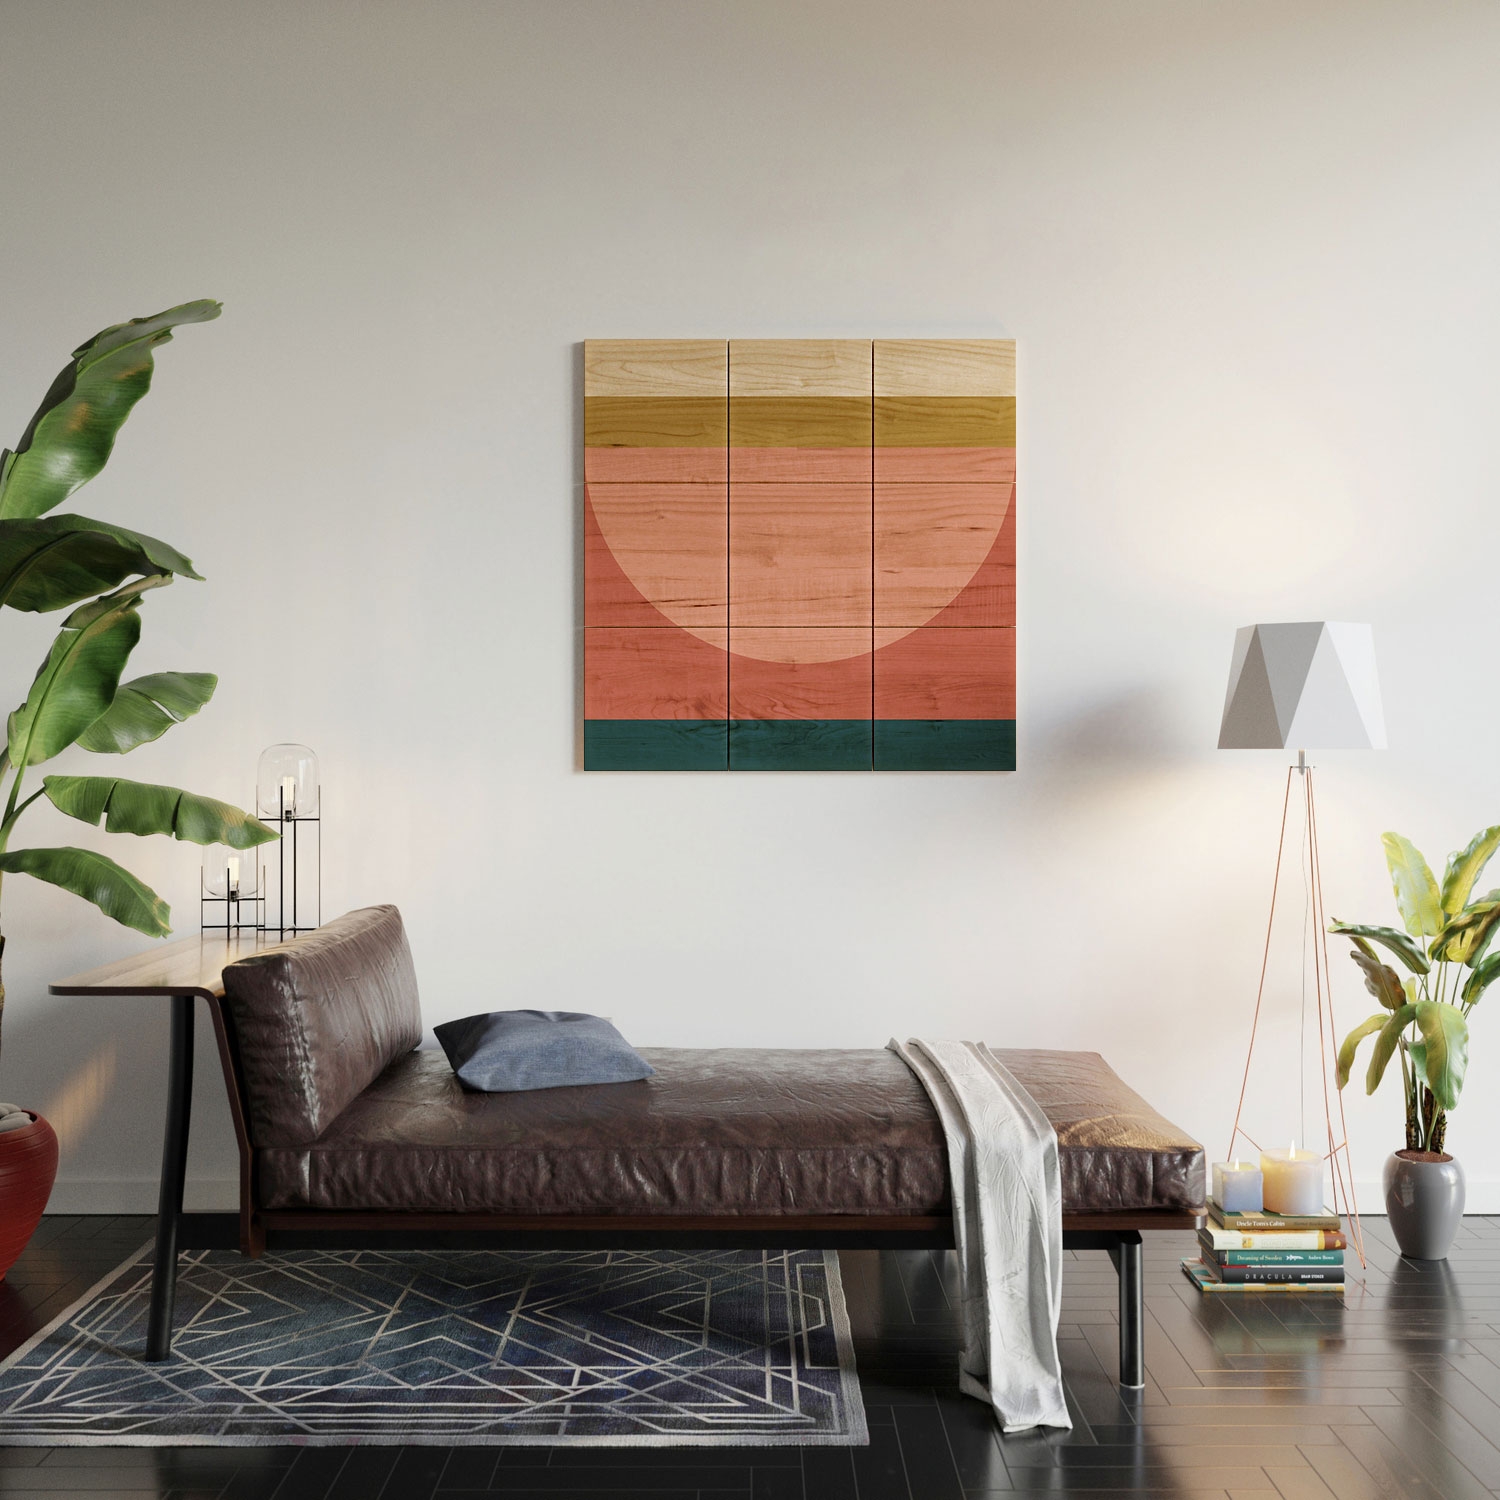 Maximalist Geometric 03 by The Old Art Studio - Wood Wall Mural3' X 3' (Nine 12" Wood Squares) - Image 0